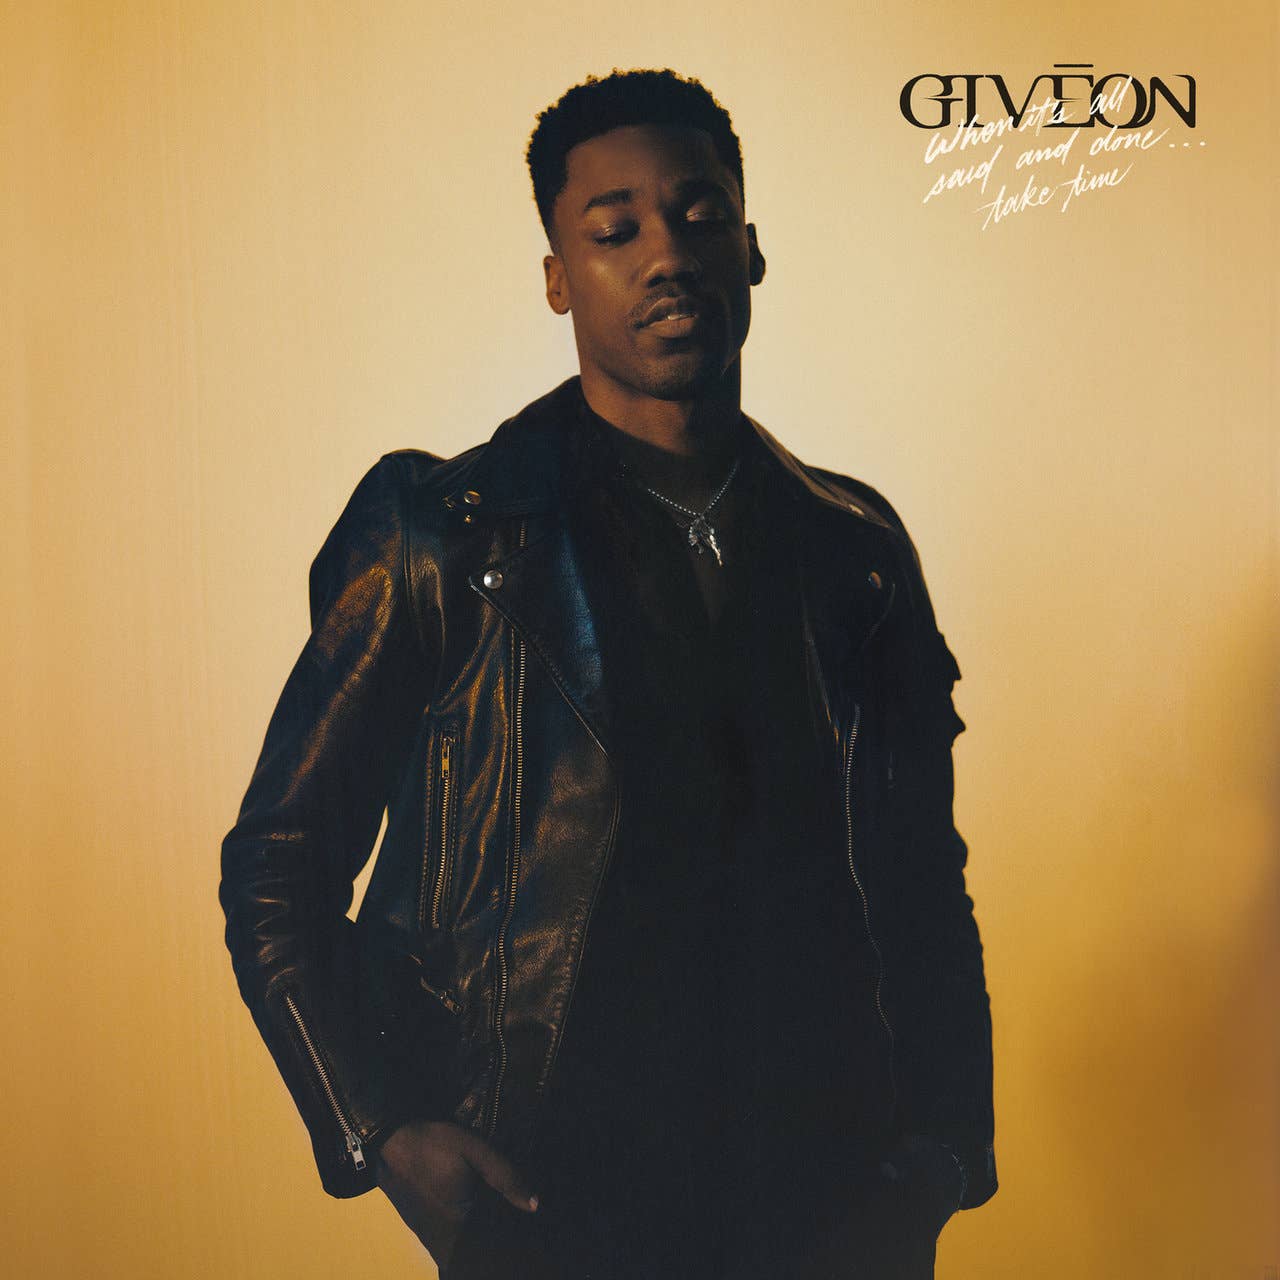 Giveon Breaks Down The Meaning Of “Like I Want You”